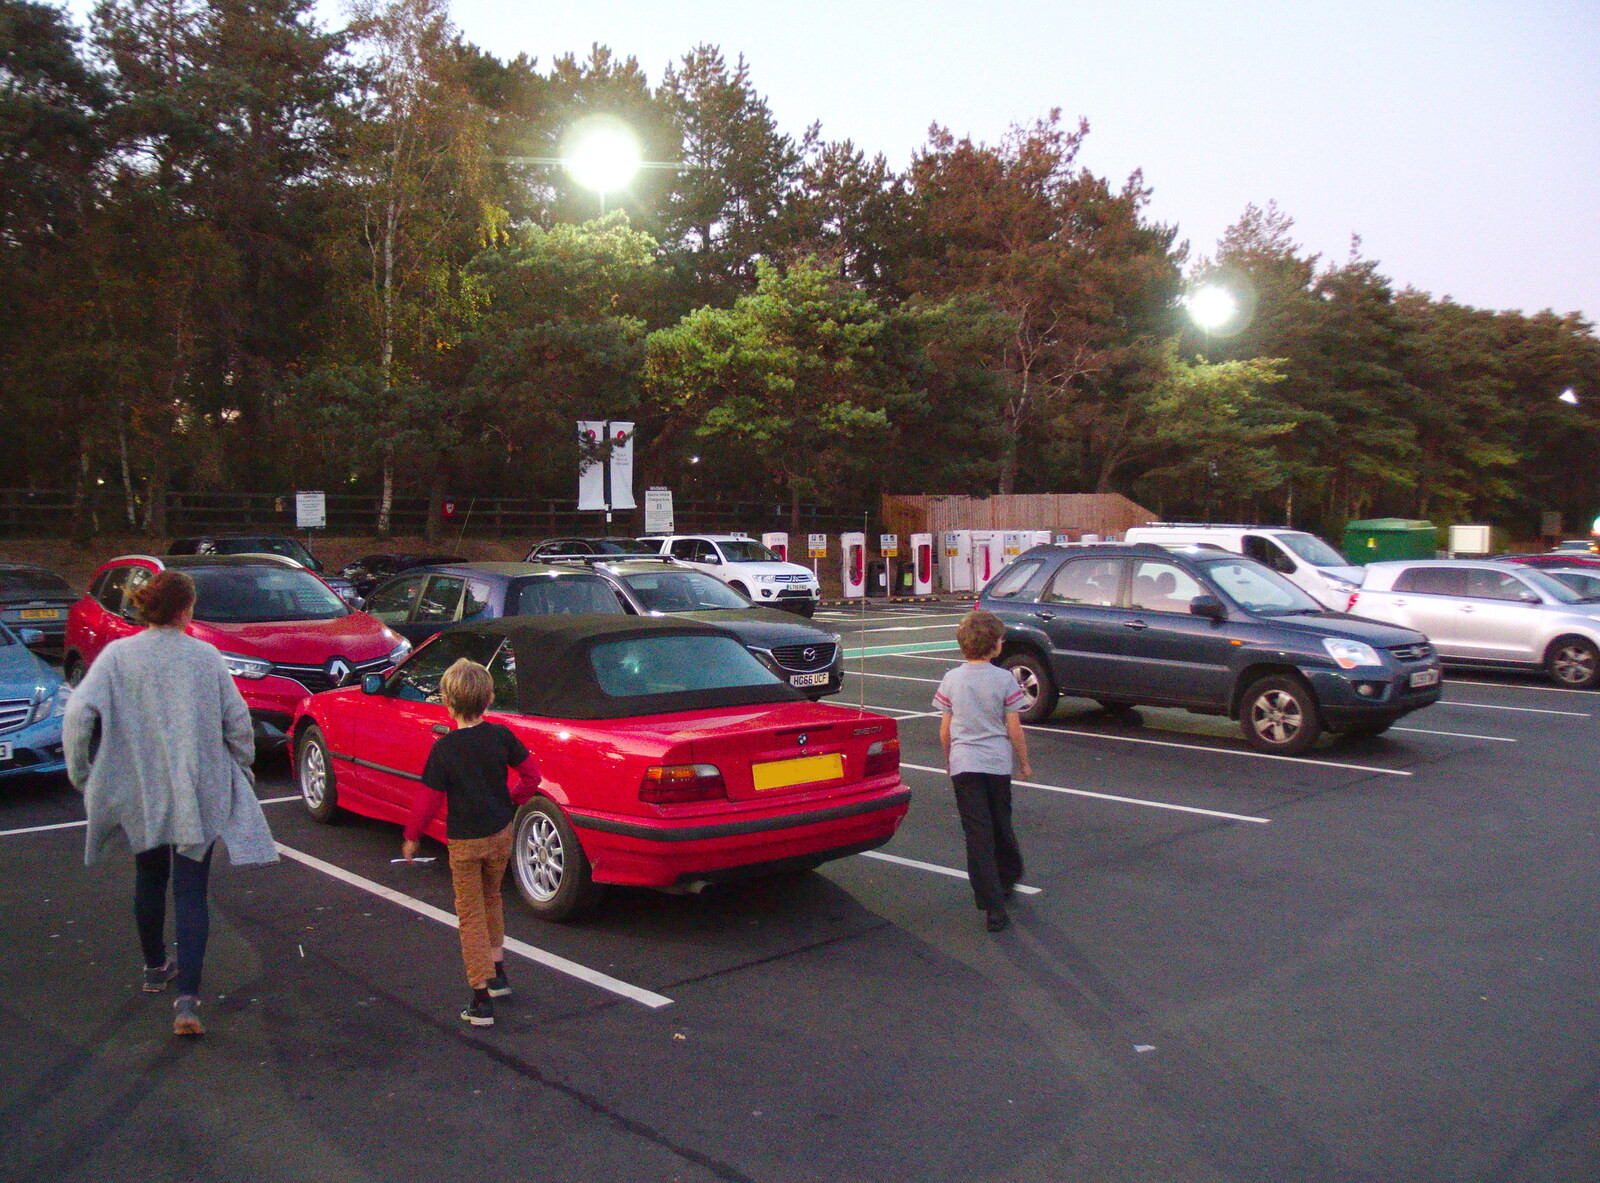 We stop off for a wee at Fleet Services on the M3 from A Trip to the South Coast, Highcliffe, Dorset - 20th September 2019